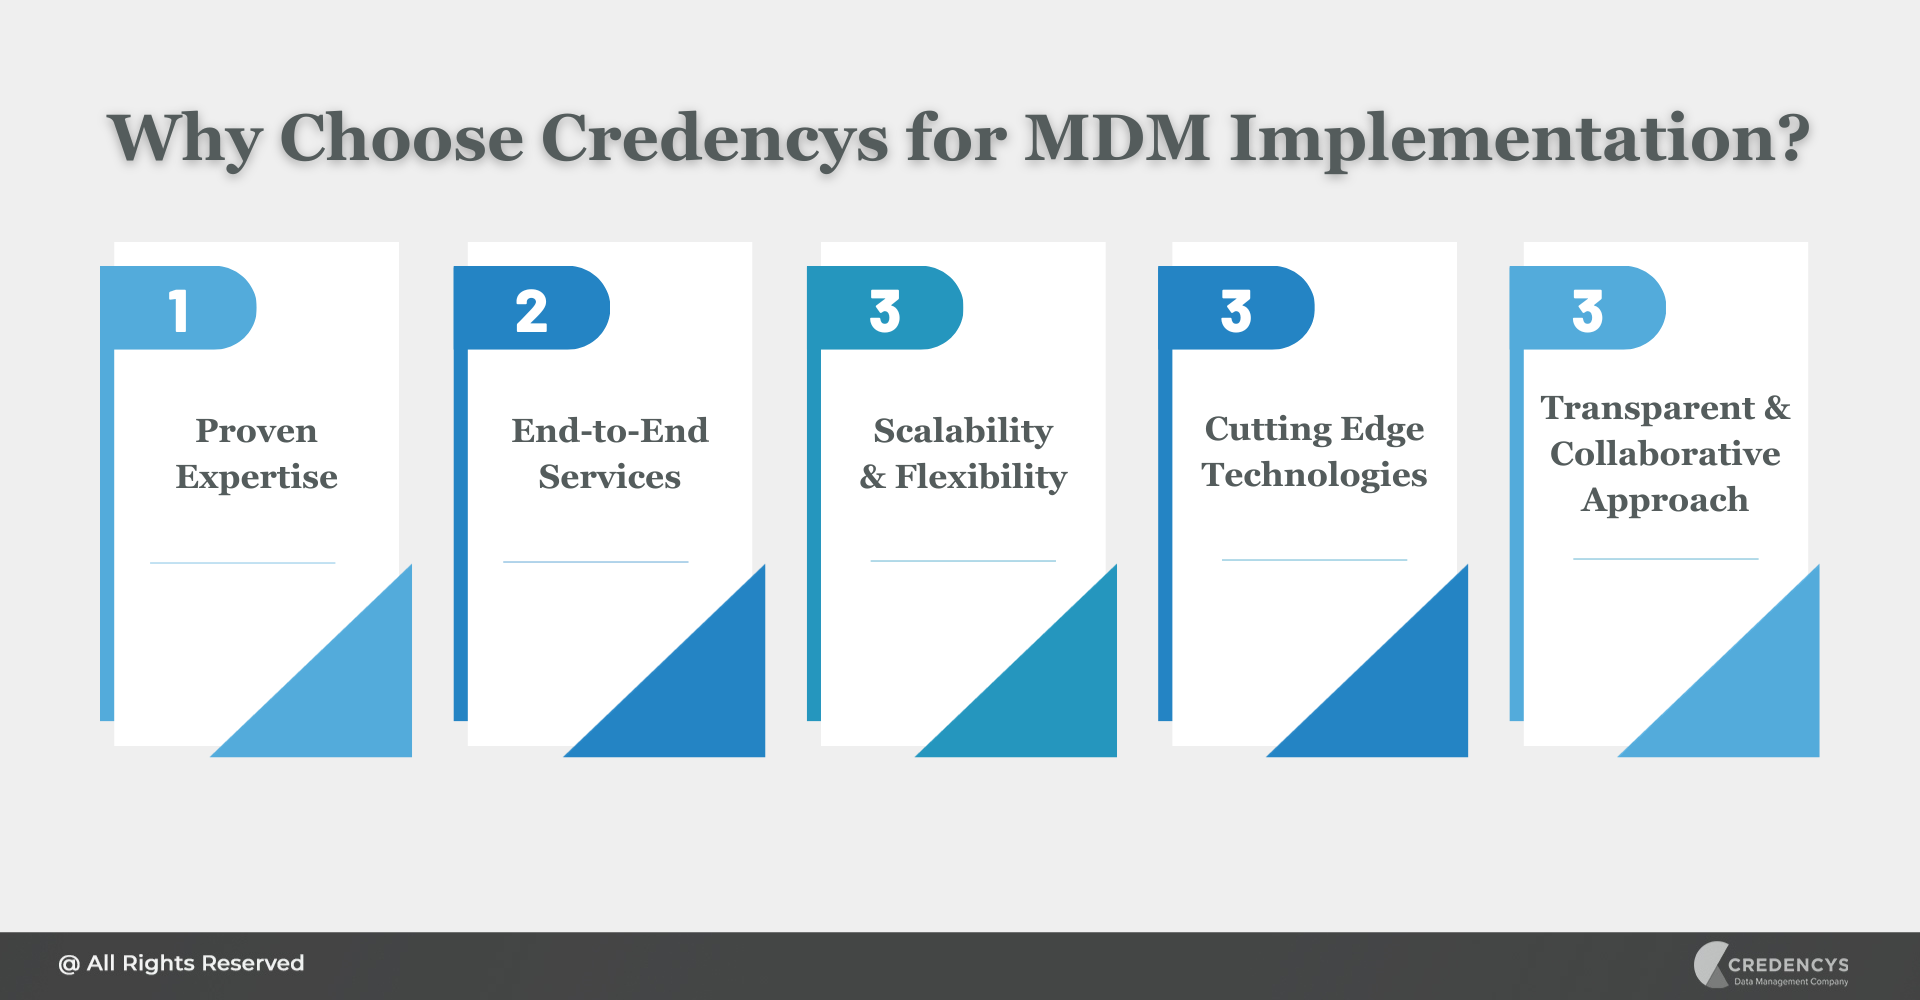 Why Choose Credencys for MDM Implementation